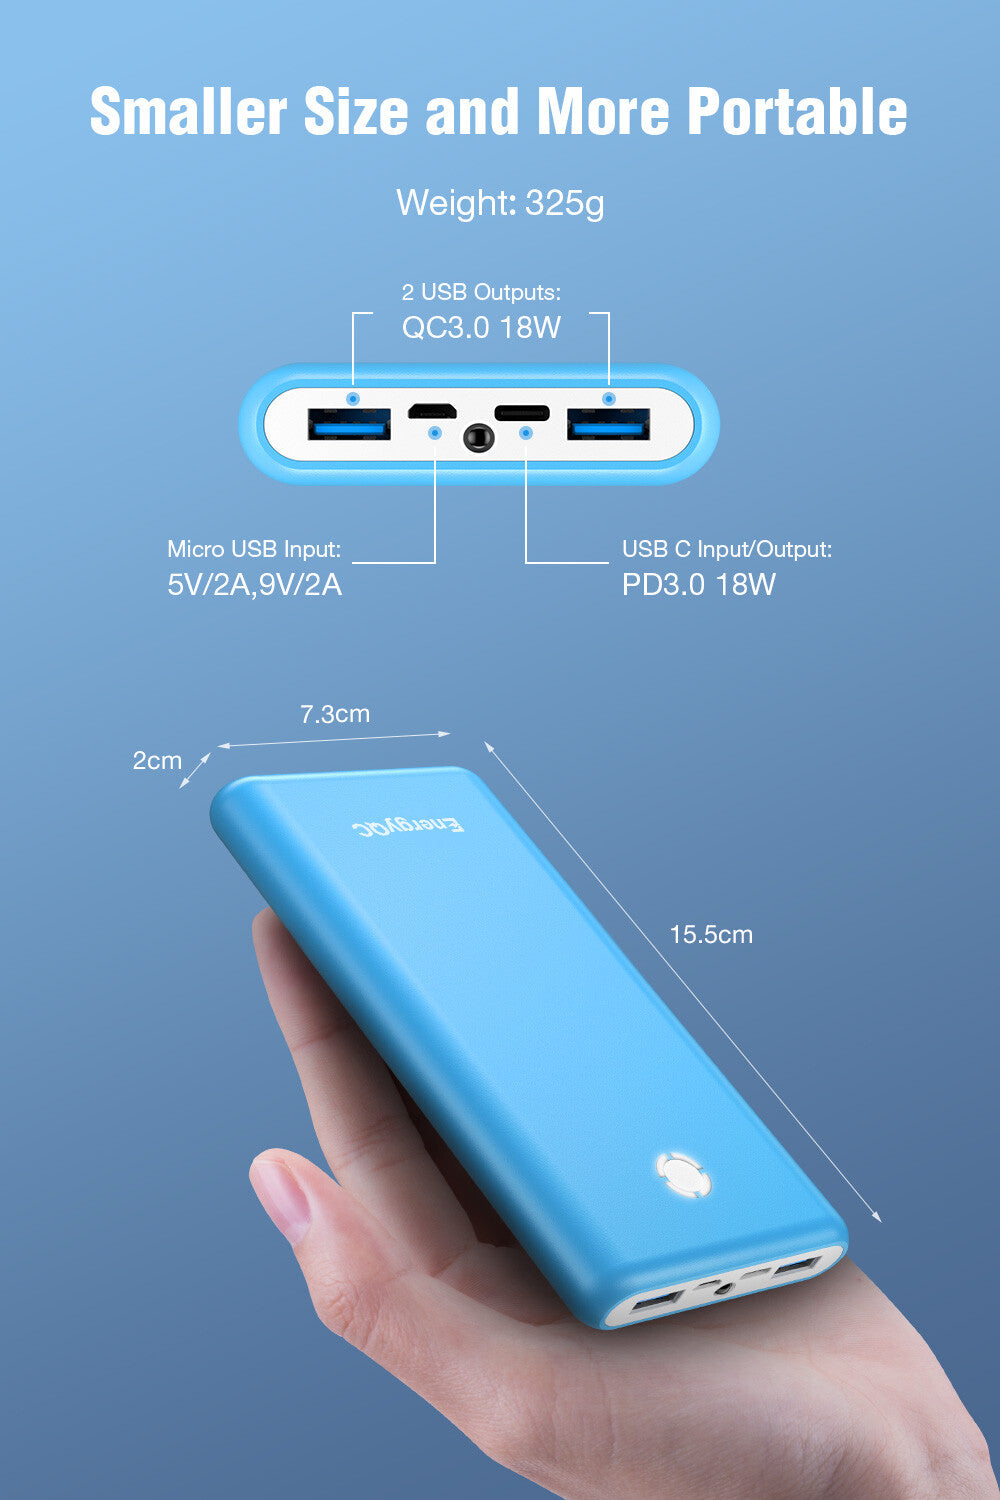 EnergyQC Pilot X7 Portable Charger,20000mAh 18W PD Fast Charging Power Bank,USB C Input/Output Battery Pack with LED Flashlight for iPhone,Samsung and More